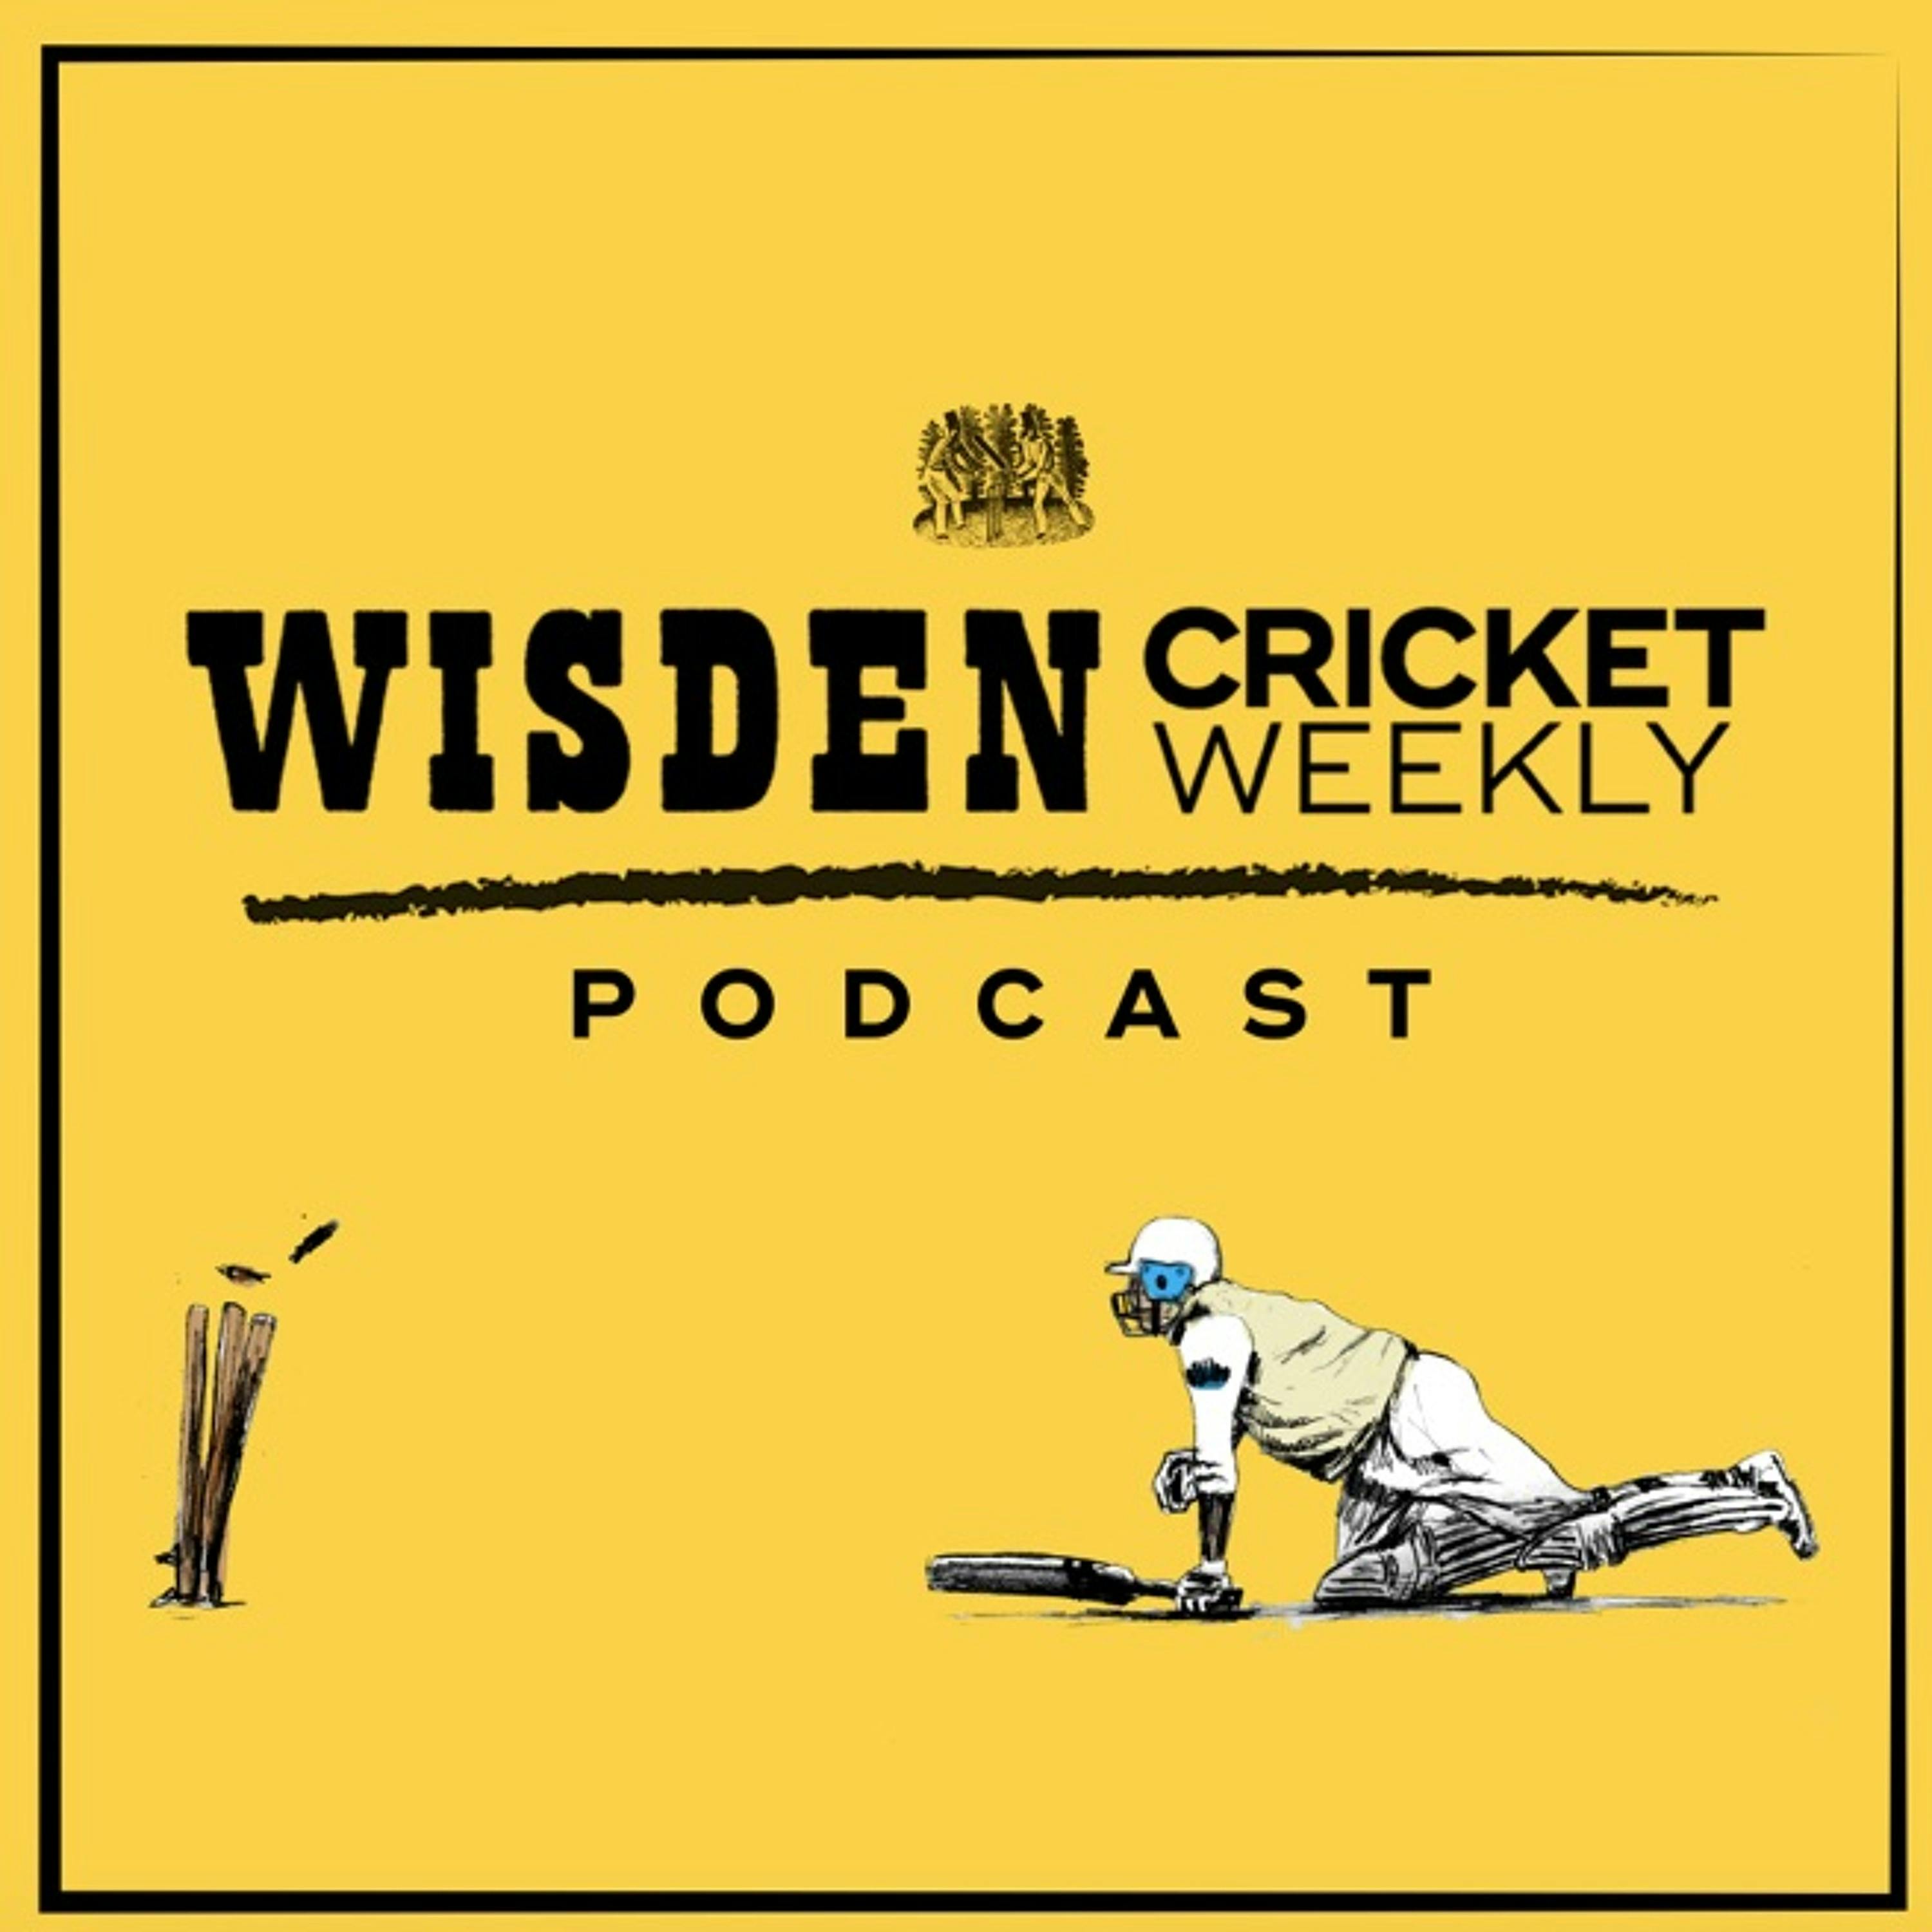 Episode 9 - 2018 in review, English players in the IPL and Niroshan Dickwella